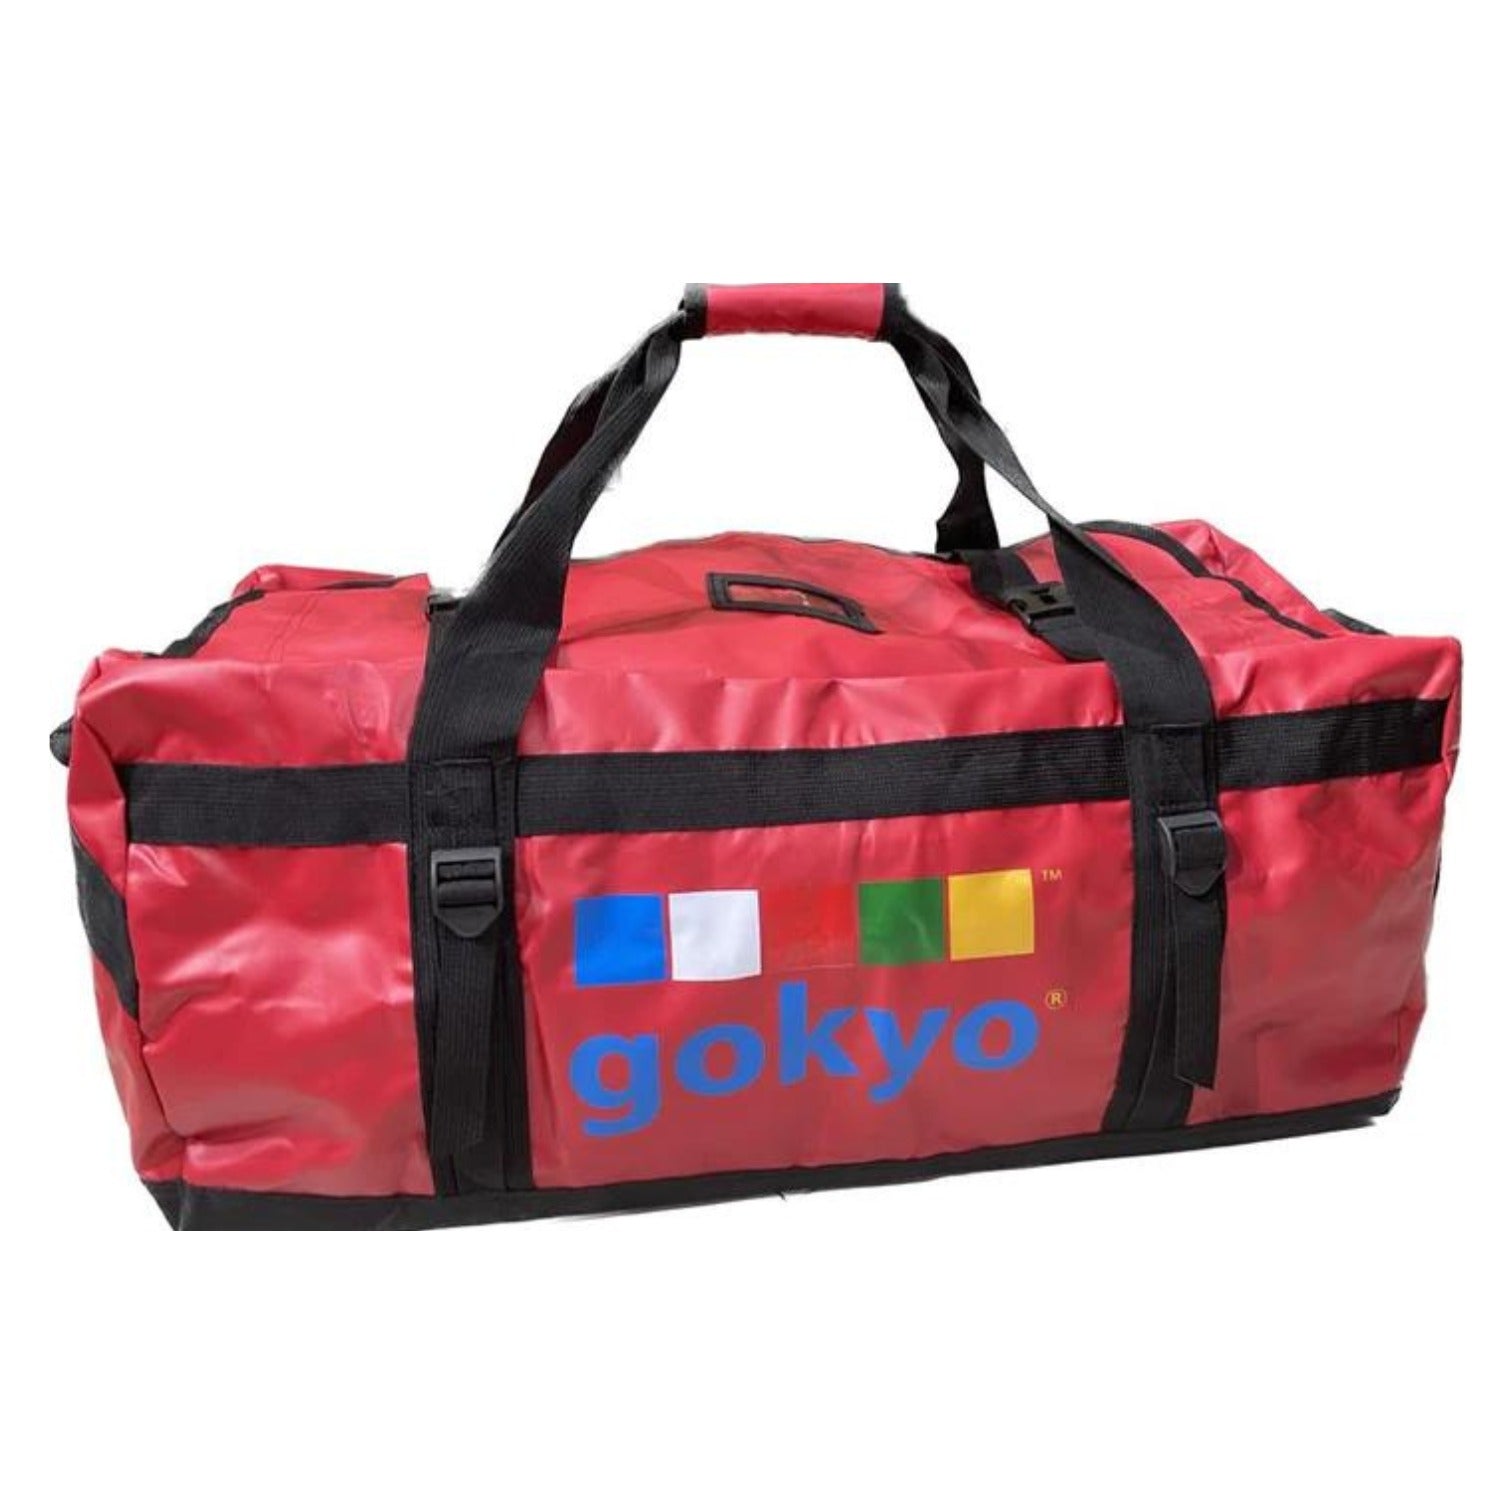 Buy Gokyo K2 Duffle Bag for Treks & Expeditions Red | Trekking & Expedition Duffle Bag at Gokyo Outdoor Clothing & Gear